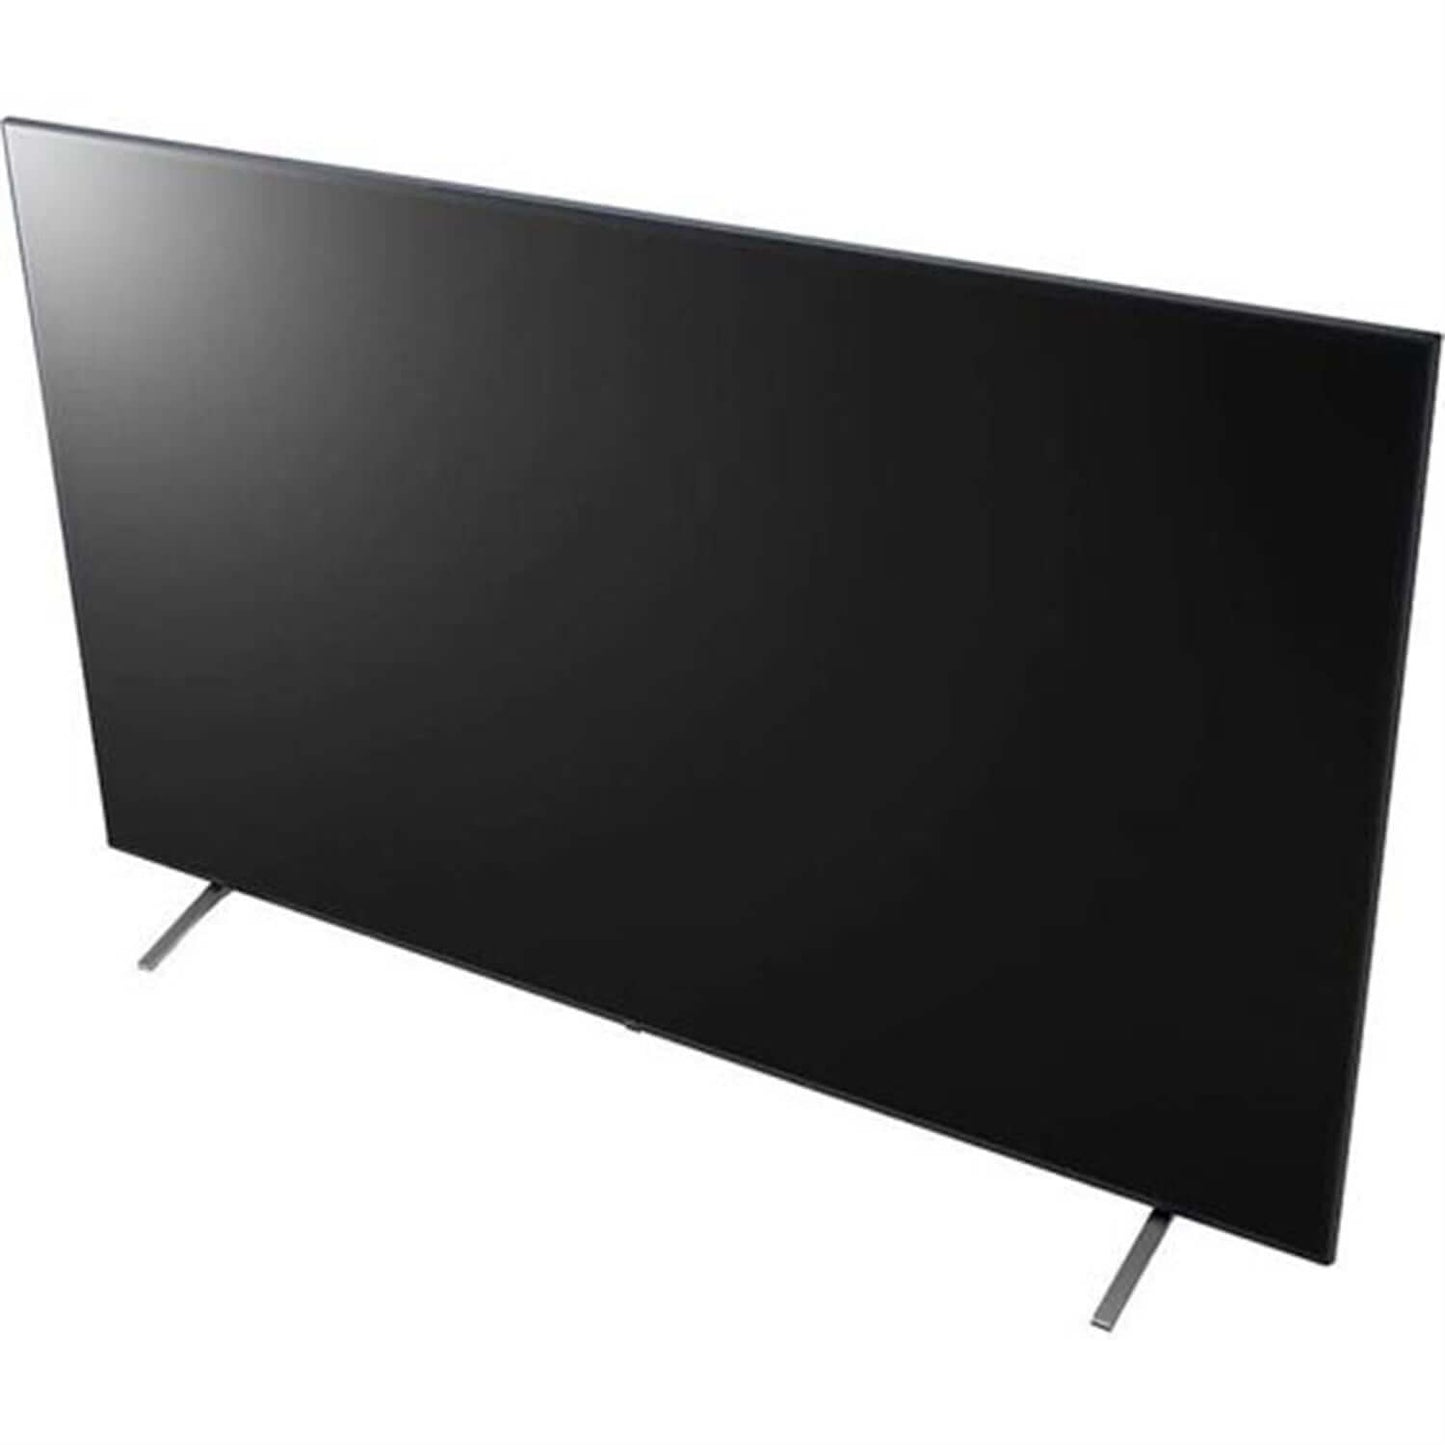 Almo Outdoor Display LG 75UR340C9UD 75" 3840 x 2160 UHD Commercial Lite LED backlit LCD TV